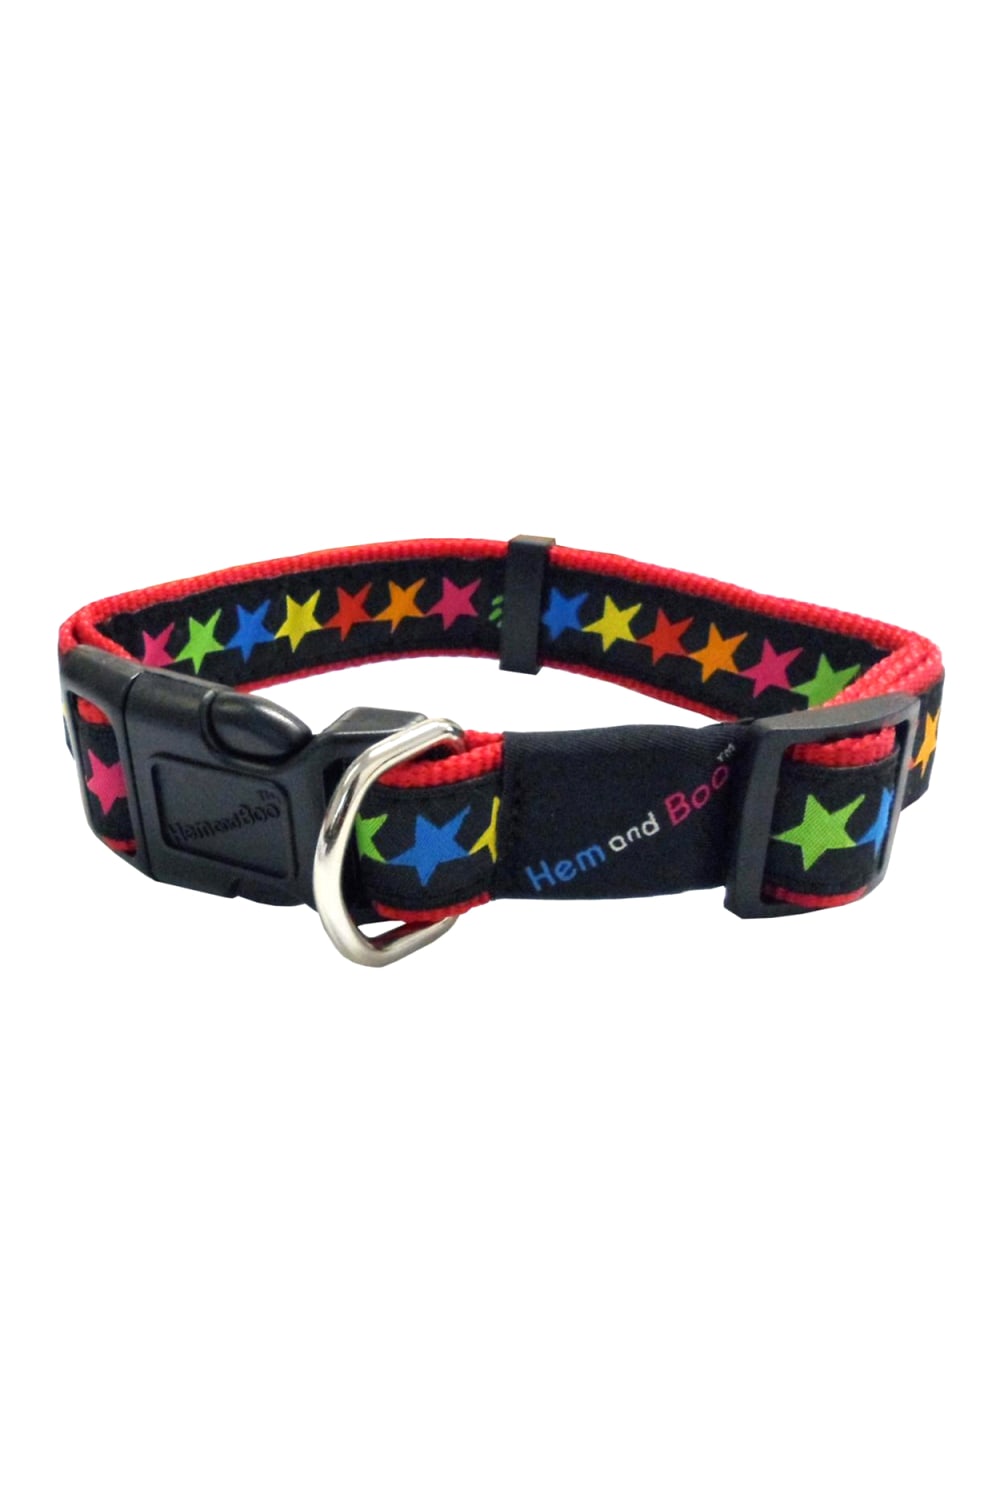 Hemm & Boo Multicolored Stars Dog Collar - Large (May Vary) (One Size)